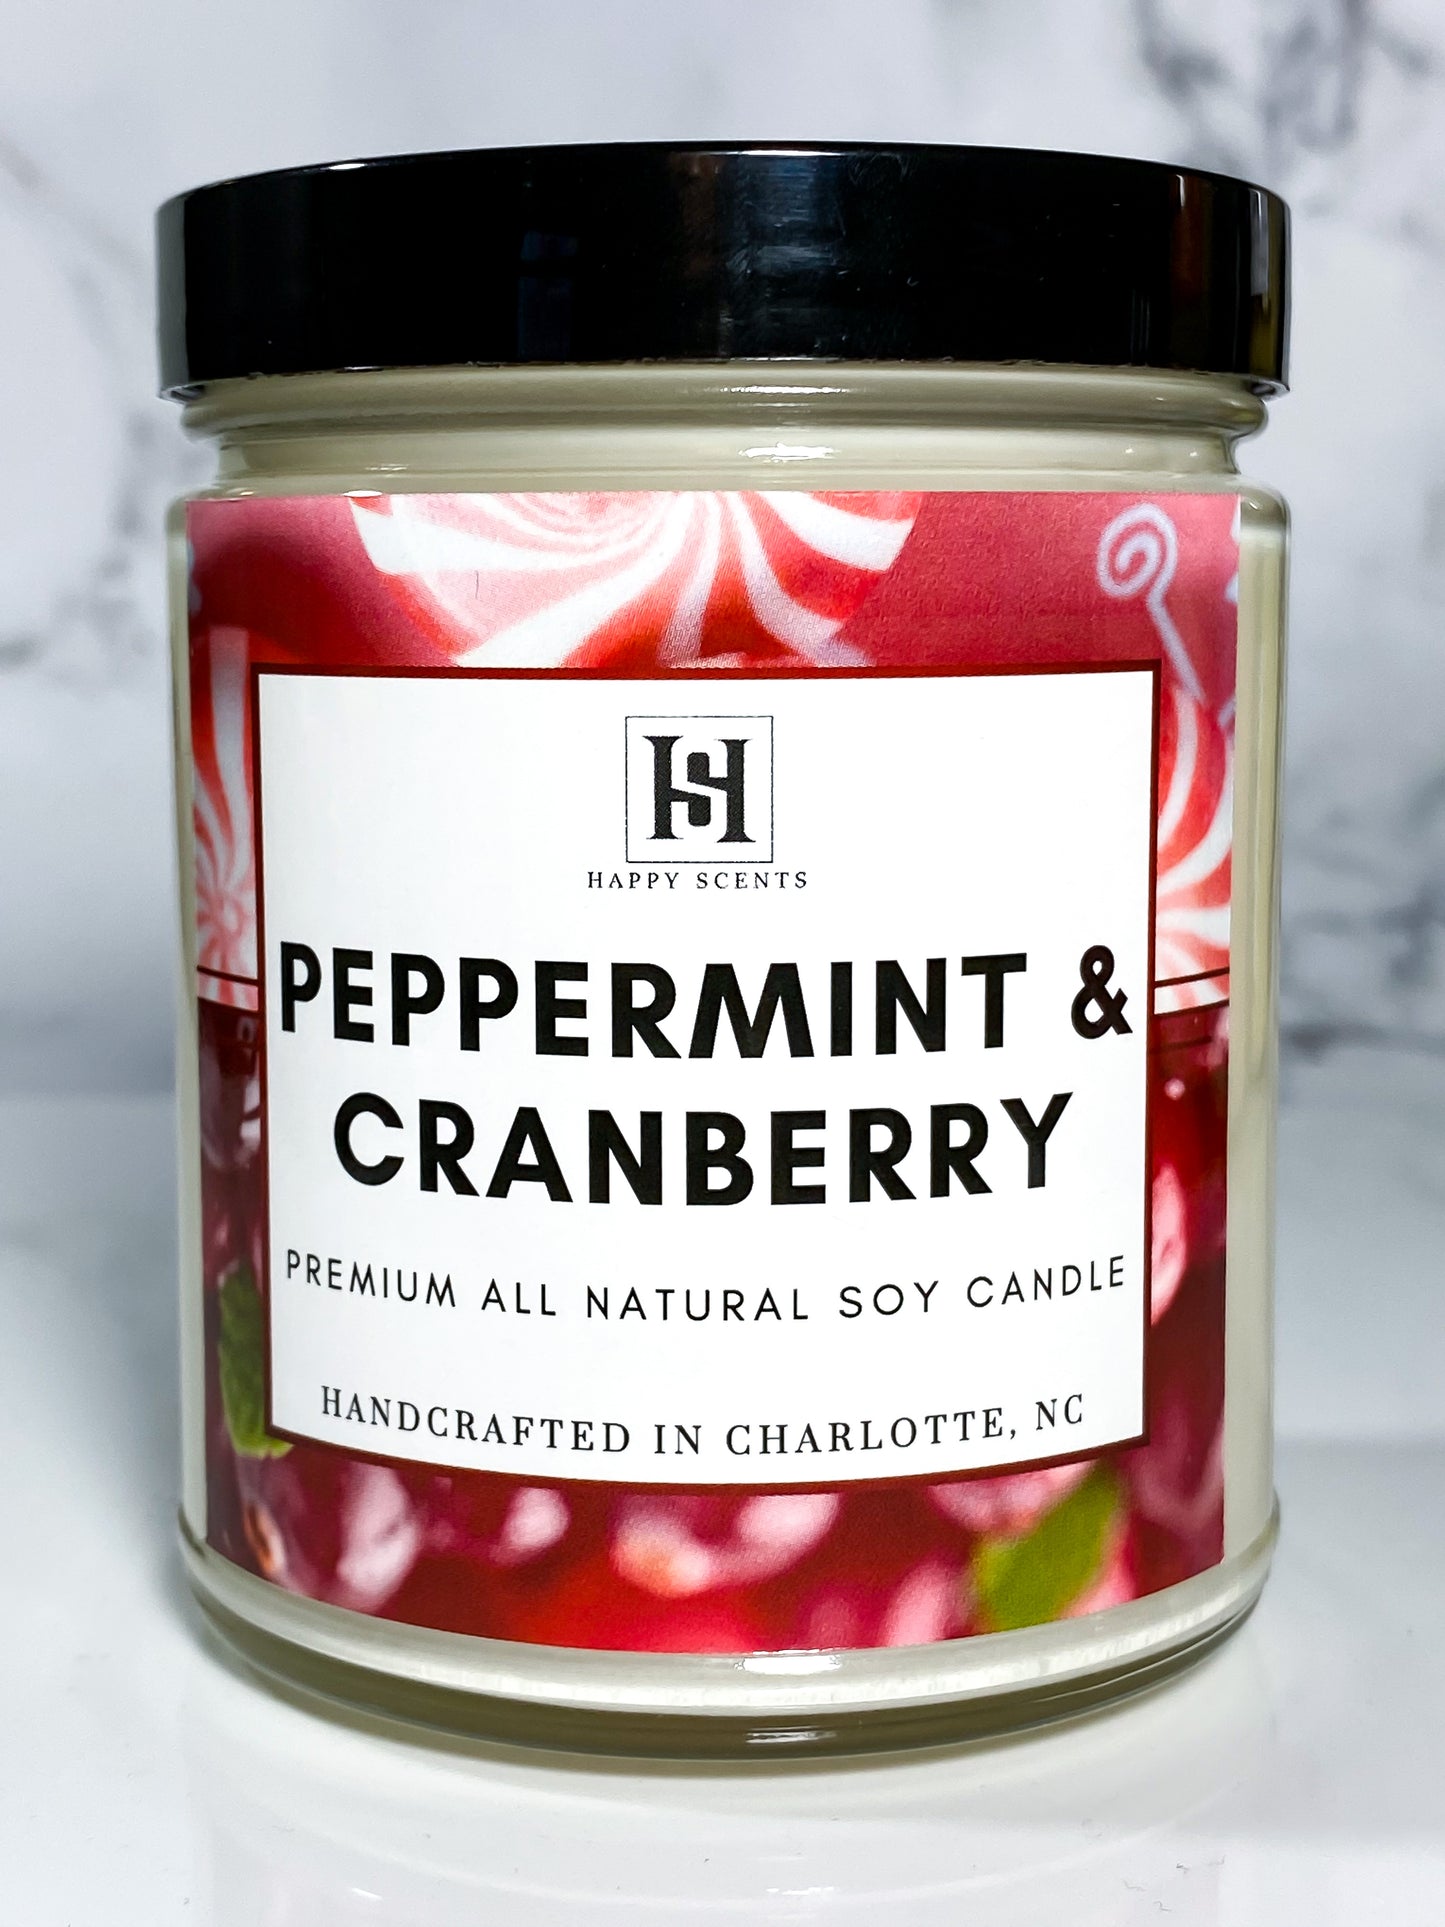 Peppermint & Cranberry Soy Candle. Holiday candles, gift idea for family, gift idea for friends.